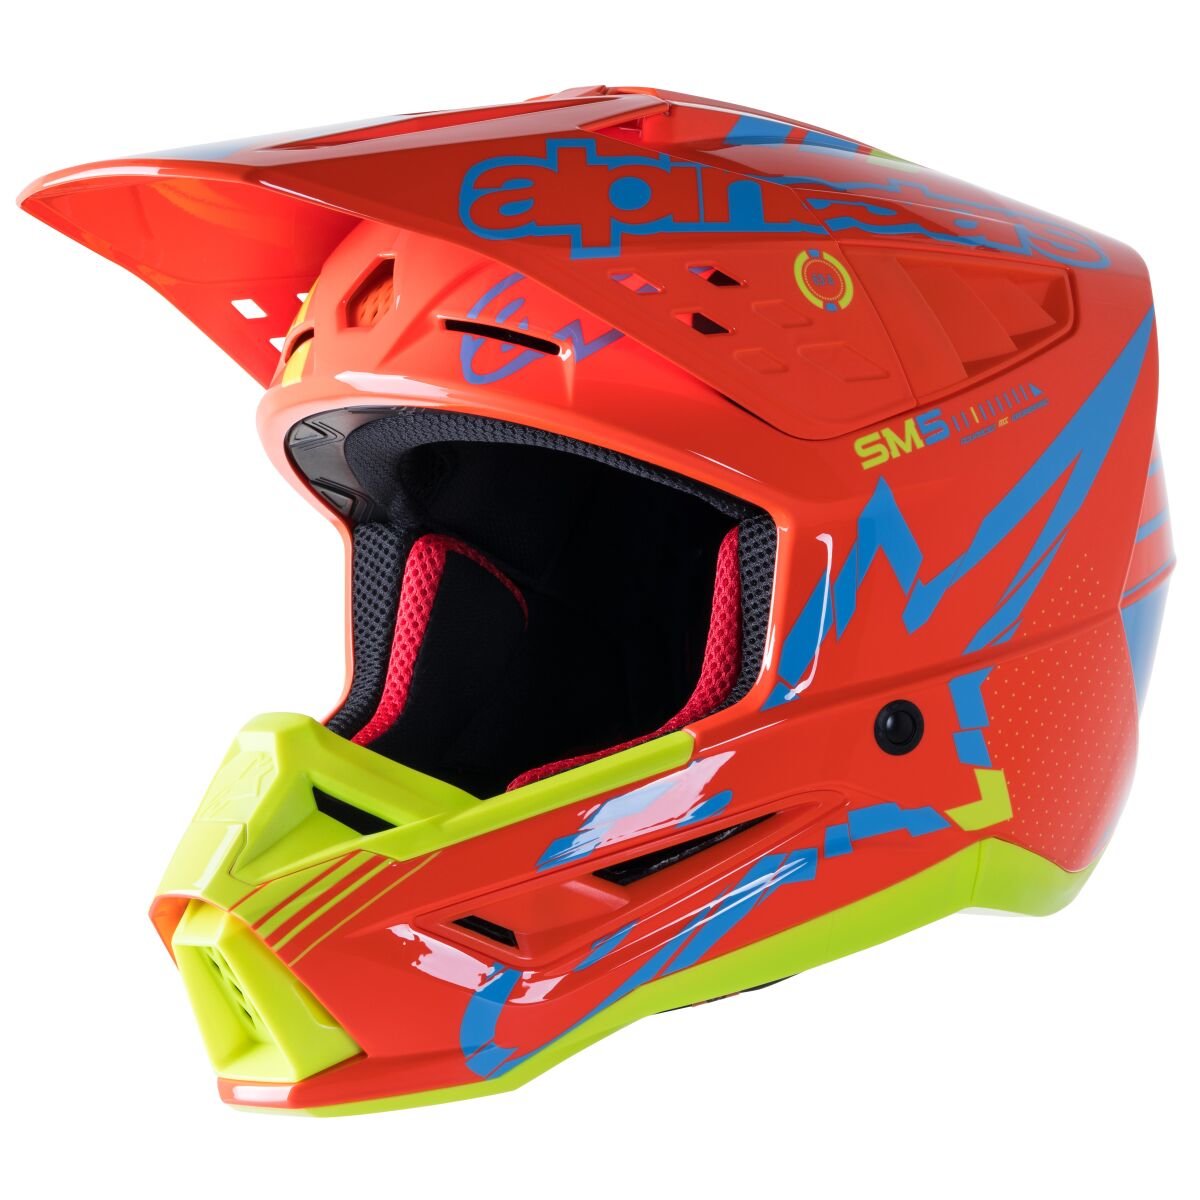 Helm Sm 5 Act Or-Yl Gl